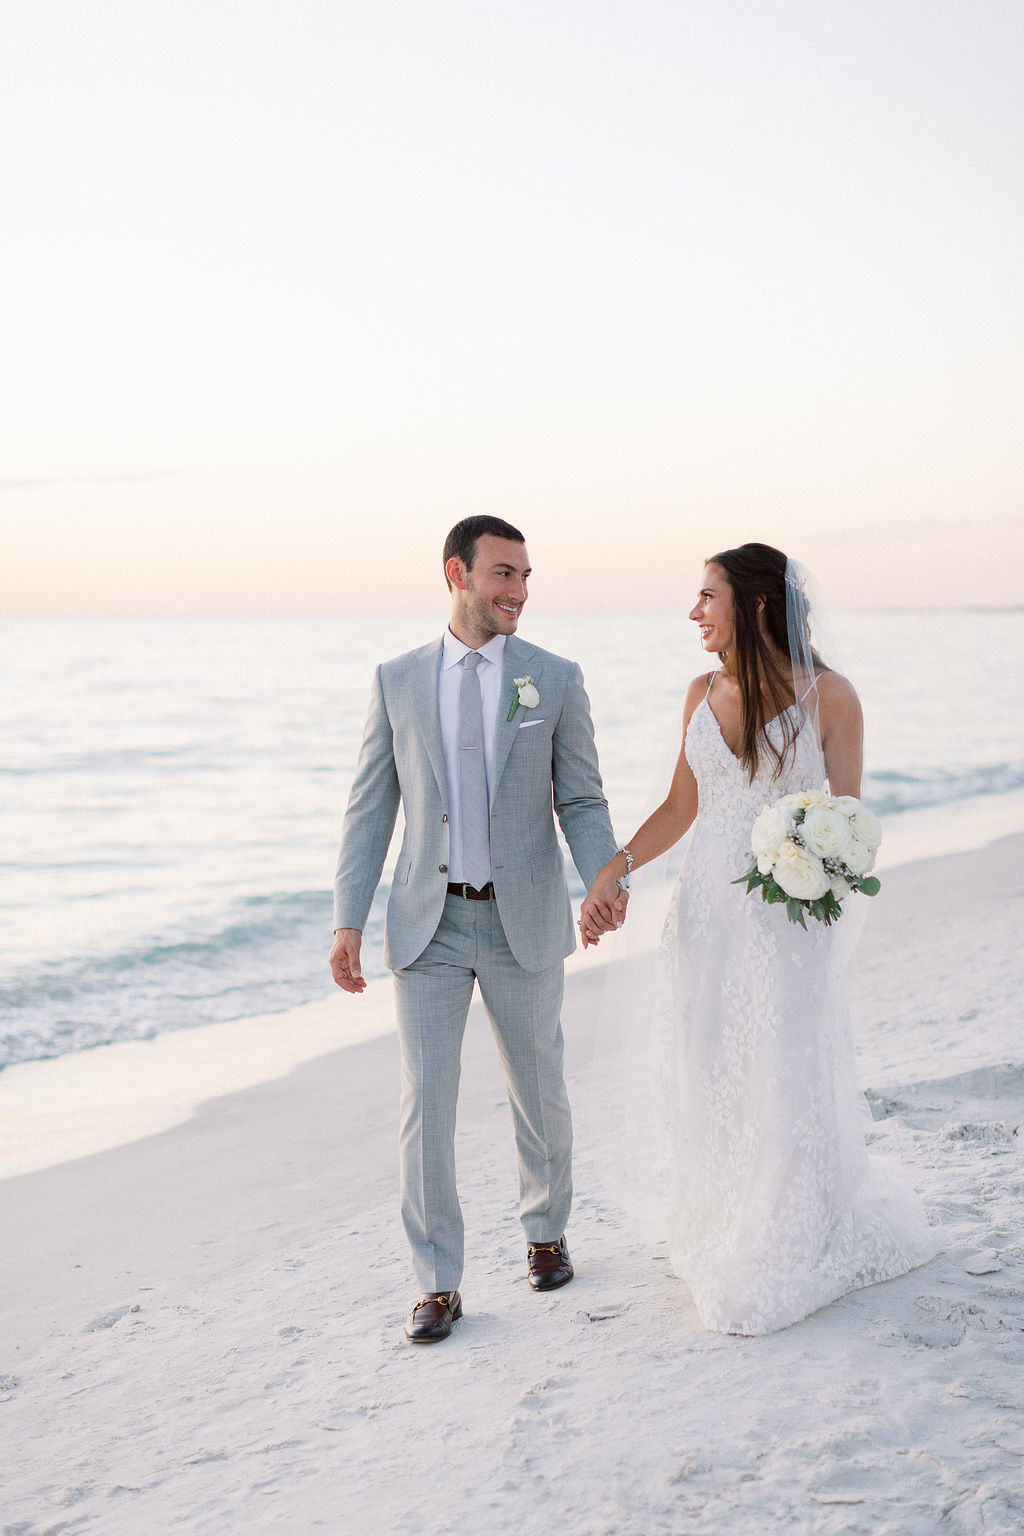 Classic Florida Bride and Groom Hold Hands and Walk on the Sand on Gulf Coast Beach, Bride Wearing Lazaro Wedding Dress Holding Ivory and White Floral Bouquet, Groom in Silver Suit, Sunset Wedding portrait